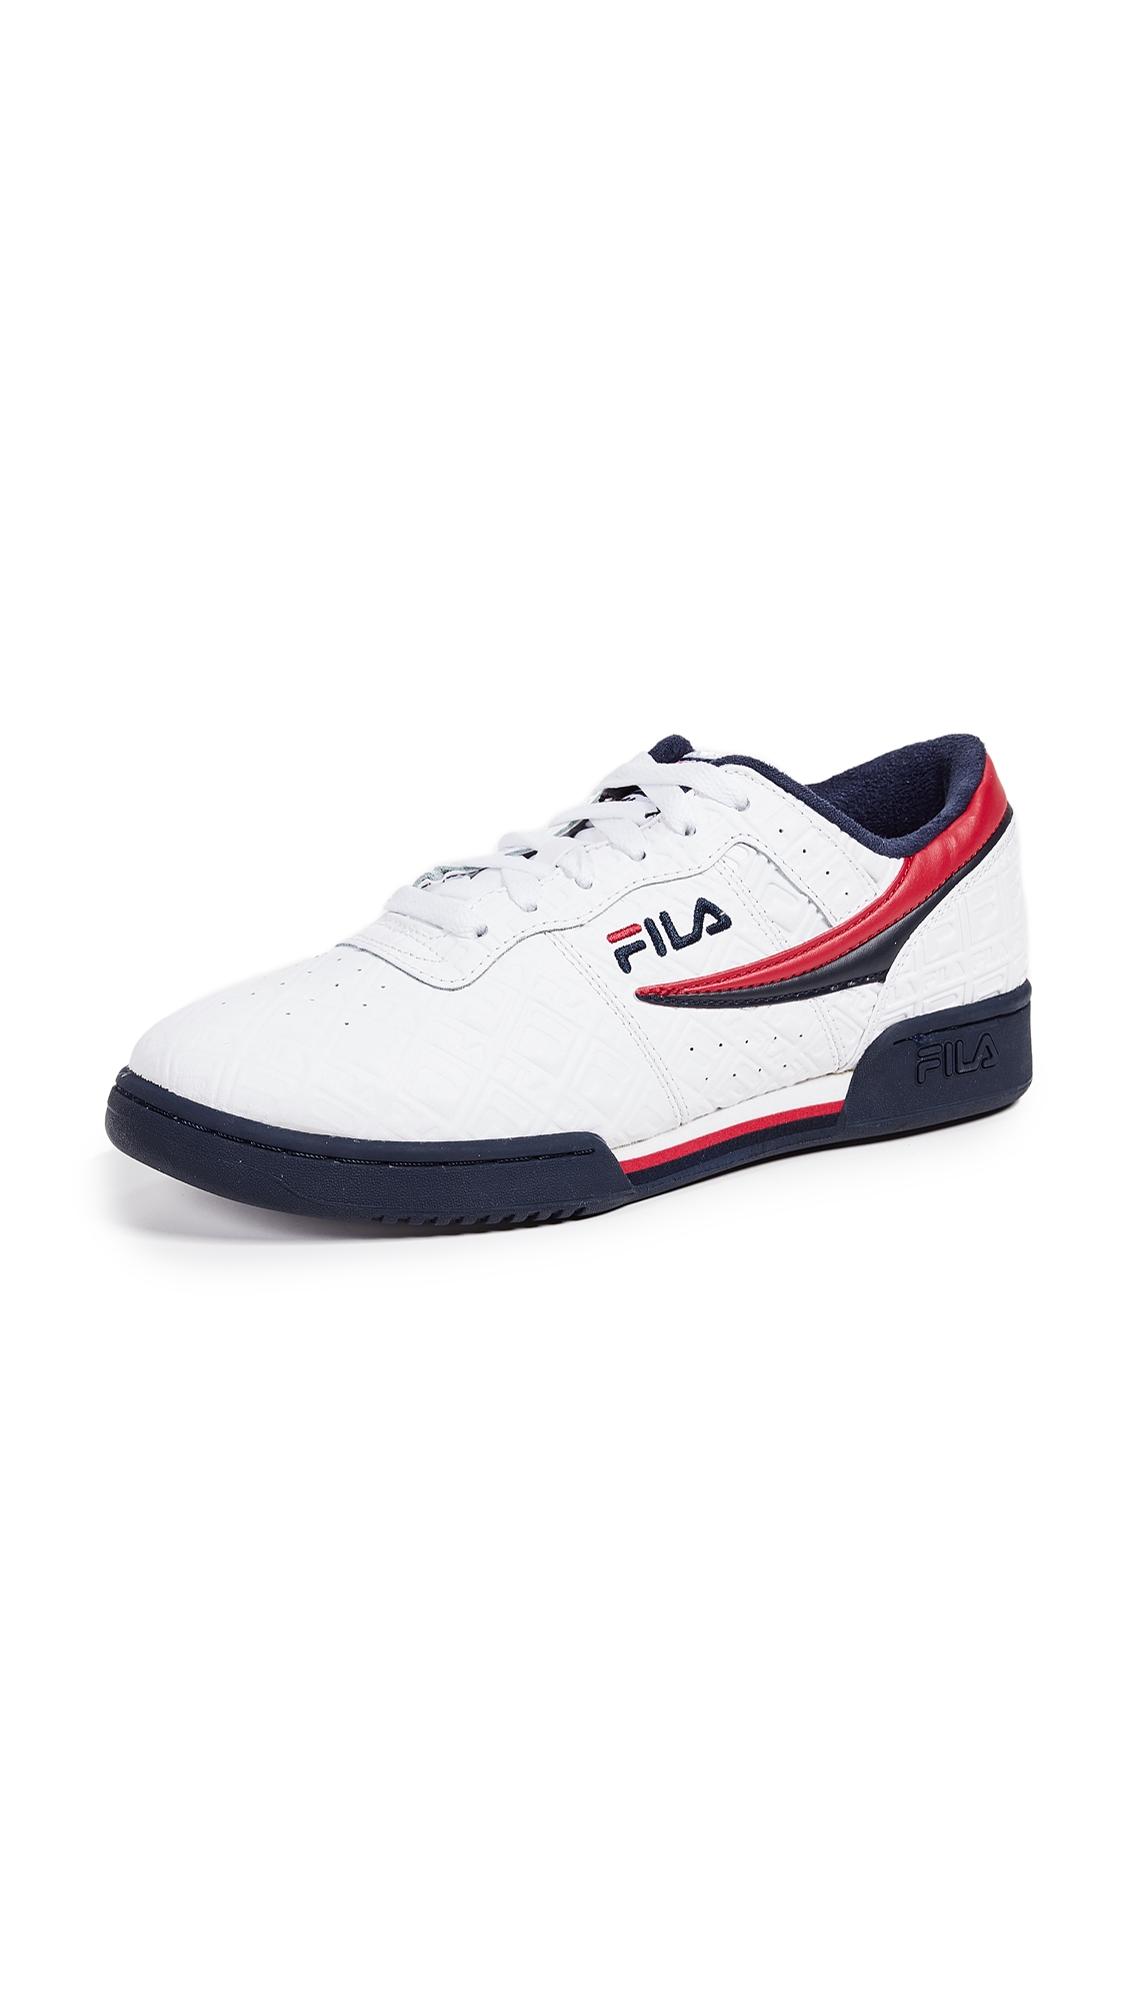 Fila Men's Original Fitness Casual Athletic Sneakers From Finish Line ...